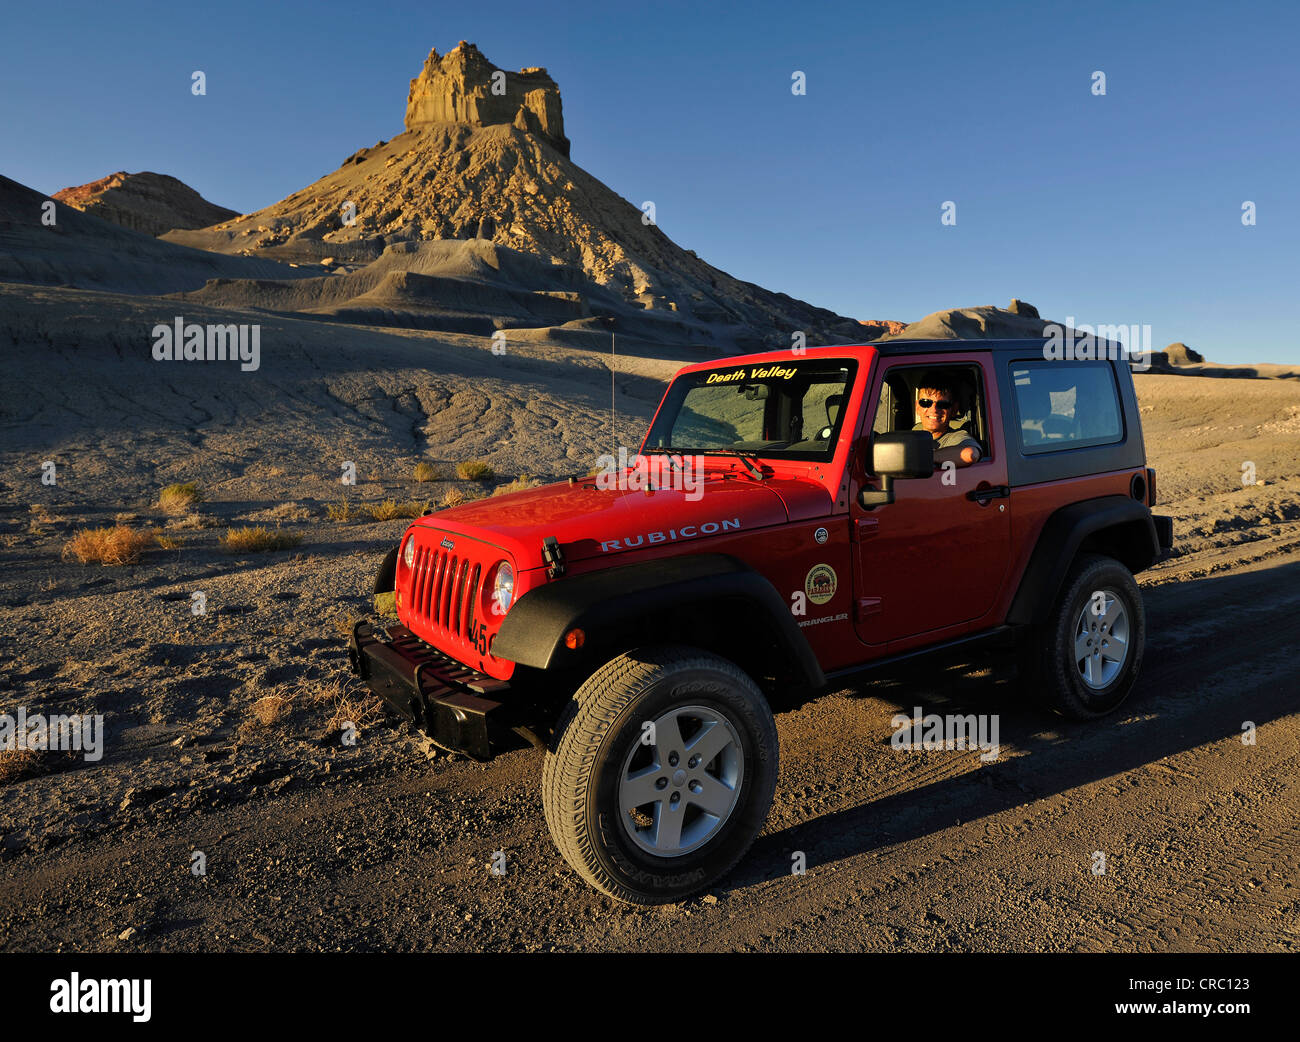 Jeep Rubicon Red Badlands Eroded Coloured Rocks Along The Smoky Mountain Road To Alstrom Point Bigwater Glen Canyon Stock Photo Alamy